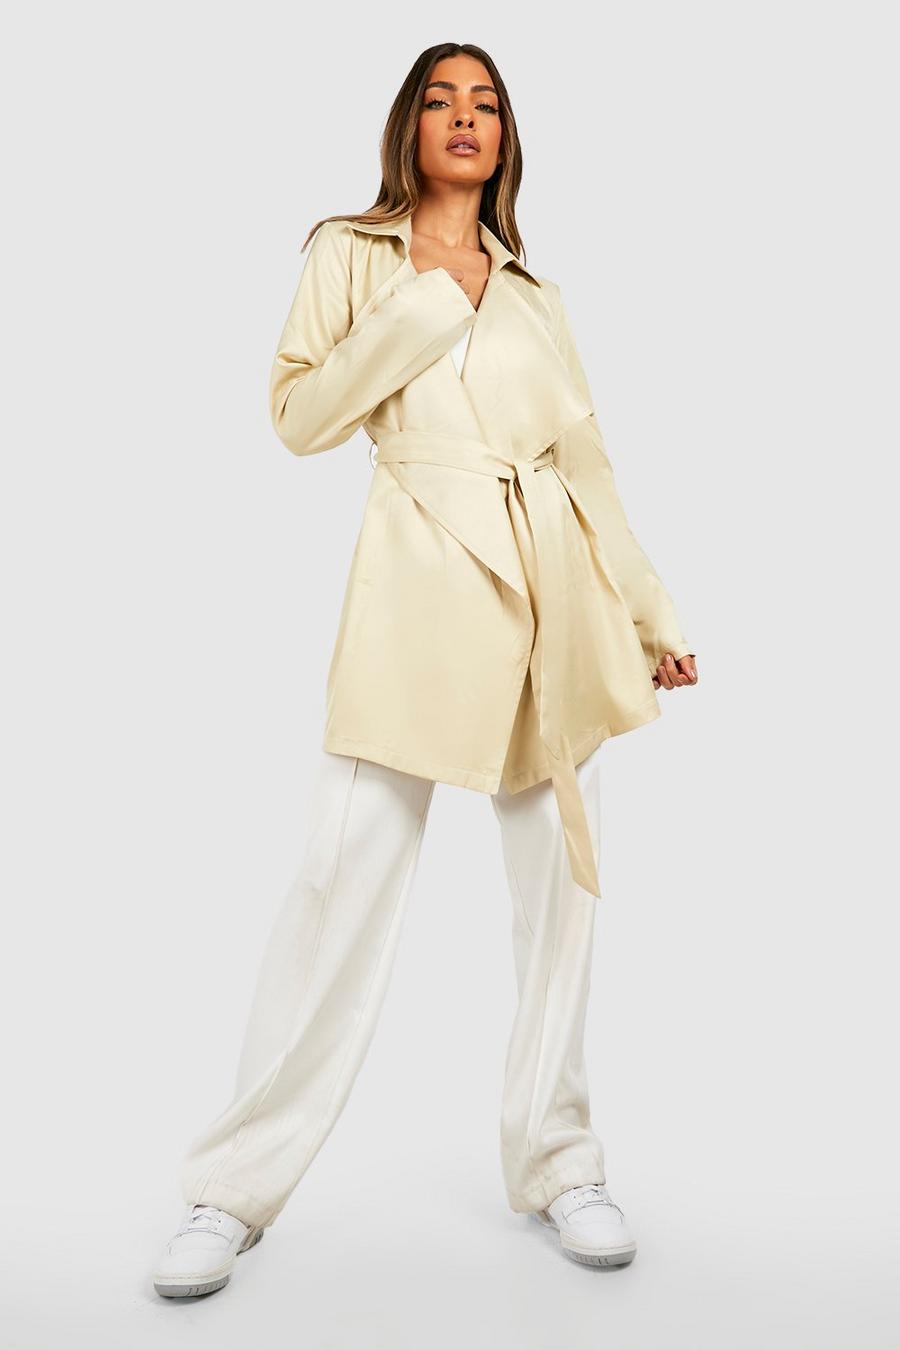 TOTITION jackets for women jackets Women's Waterfall Collar Zip Up Moto Jacket  jackets for women jackets (Color : Khaki, Size : Small) at  Women's  Coats Shop